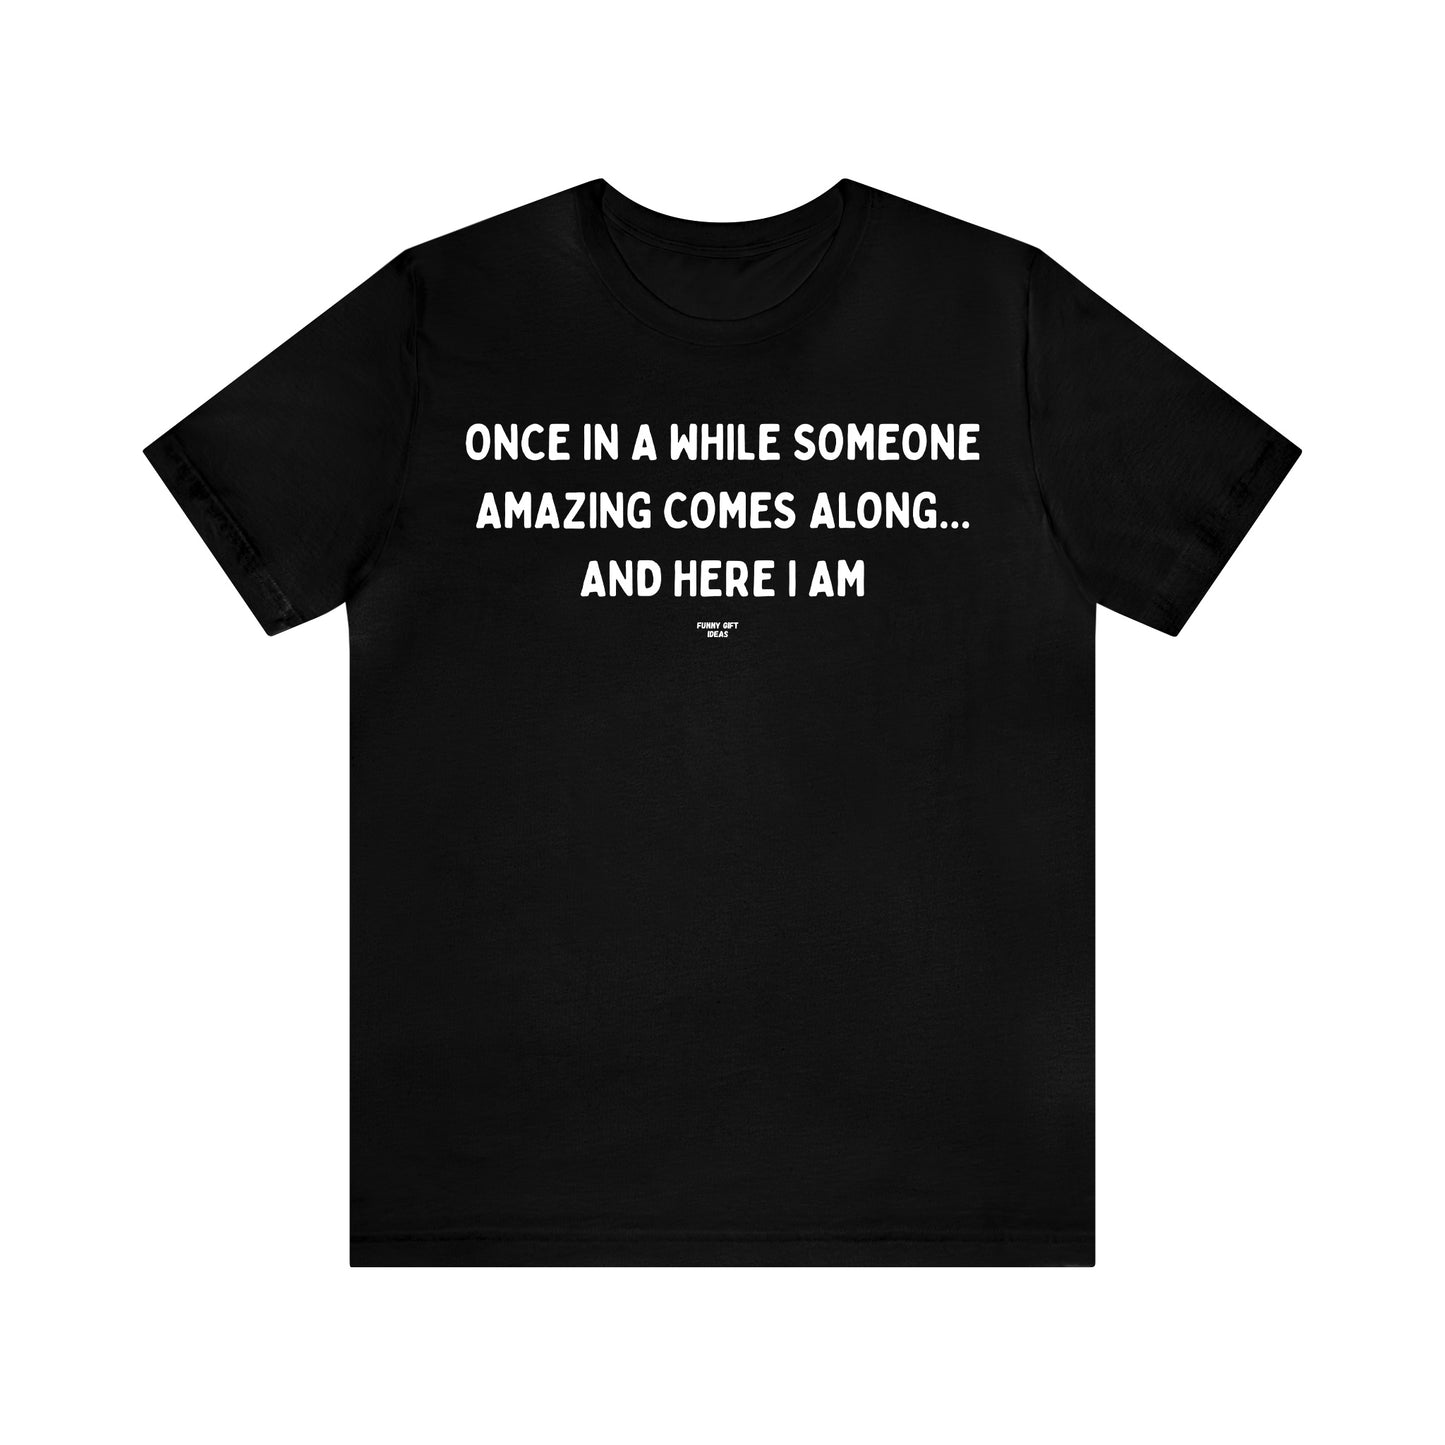 Mens T Shirts - Once in a While Someone Amazing Comes Along.. And Here I Am - Funny Men T Shirts